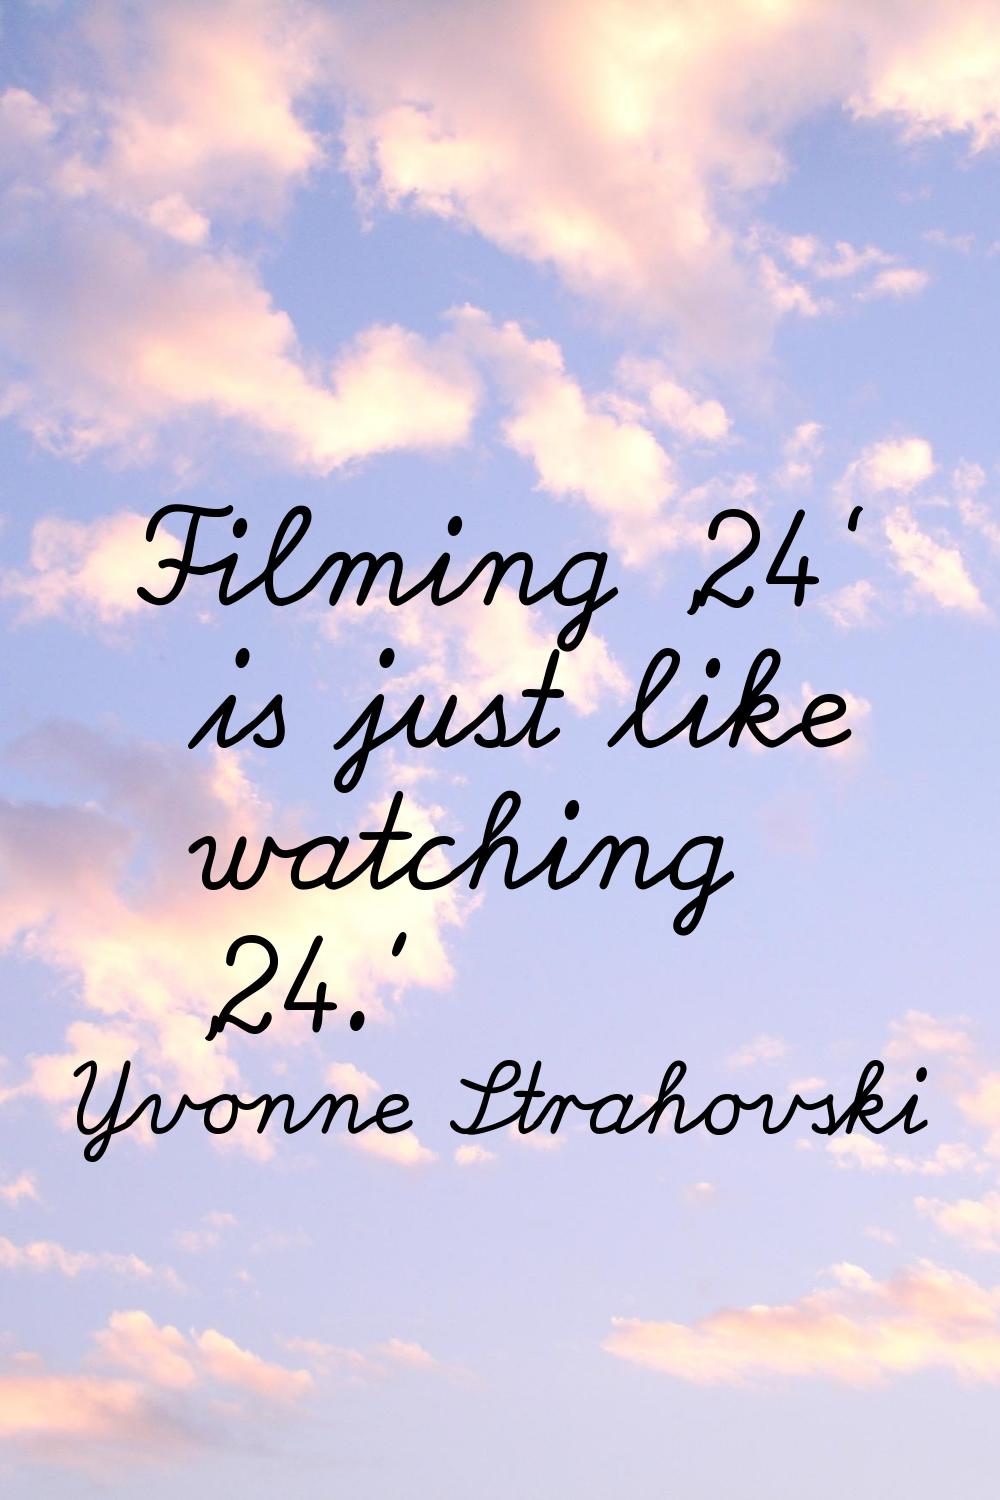 Filming '24' is just like watching '24.'